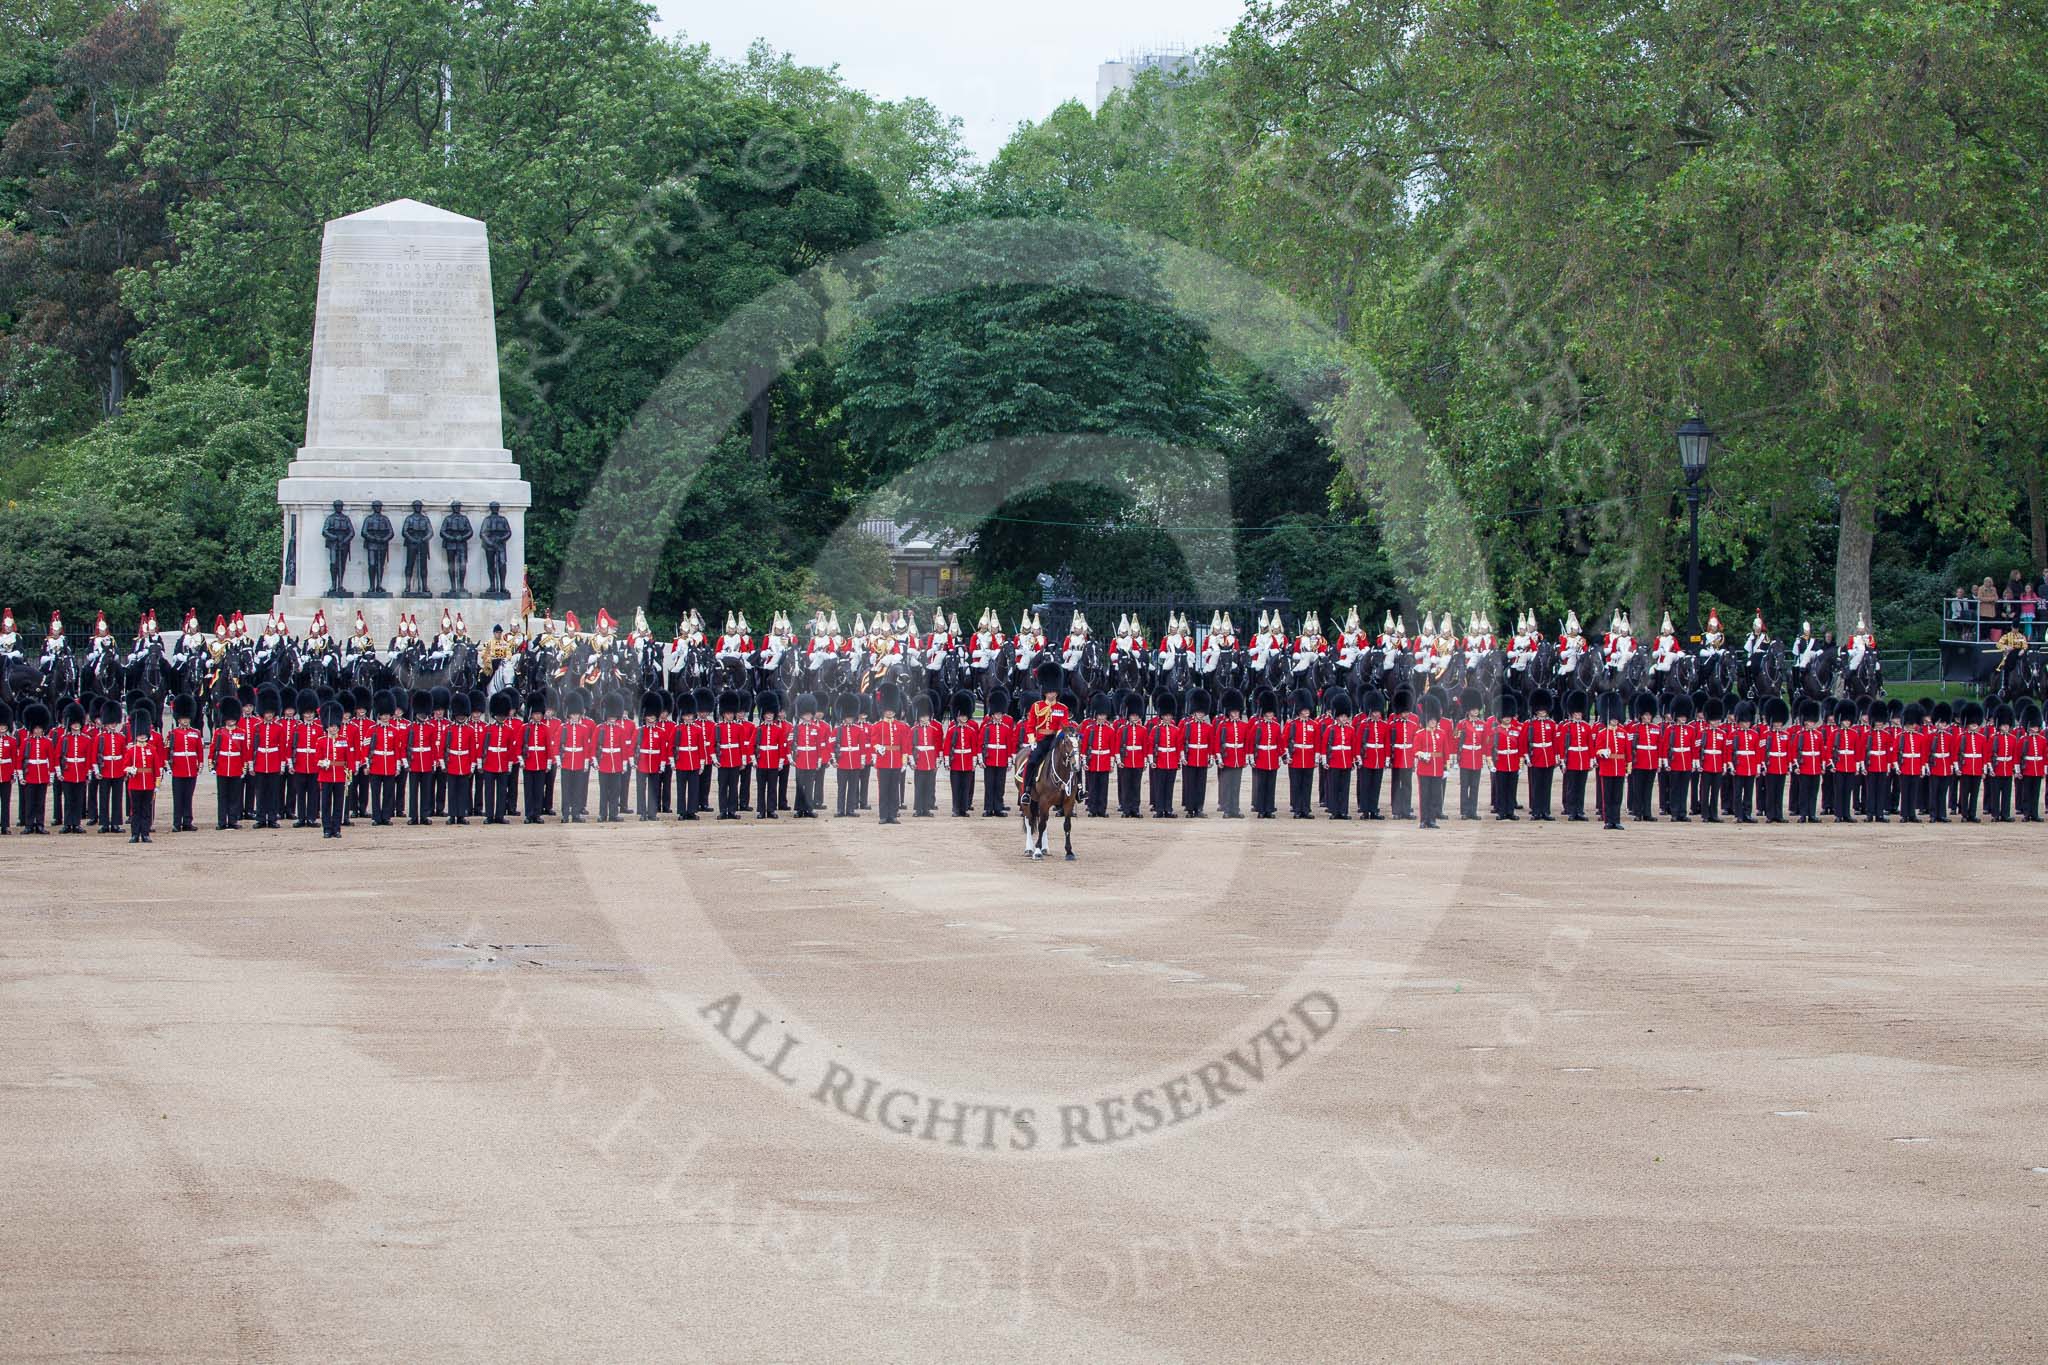 Trooping the Colour 2012: The next phase of the parade is about to begin -  the Massed Bands Troop. The Field Officer in front of guardsmen on the Northern line of Horse Guards Parade, in front of the Guards Memorial..
Horse Guards Parade, Westminster,
London SW1,

United Kingdom,
on 16 June 2012 at 11:09, image #256